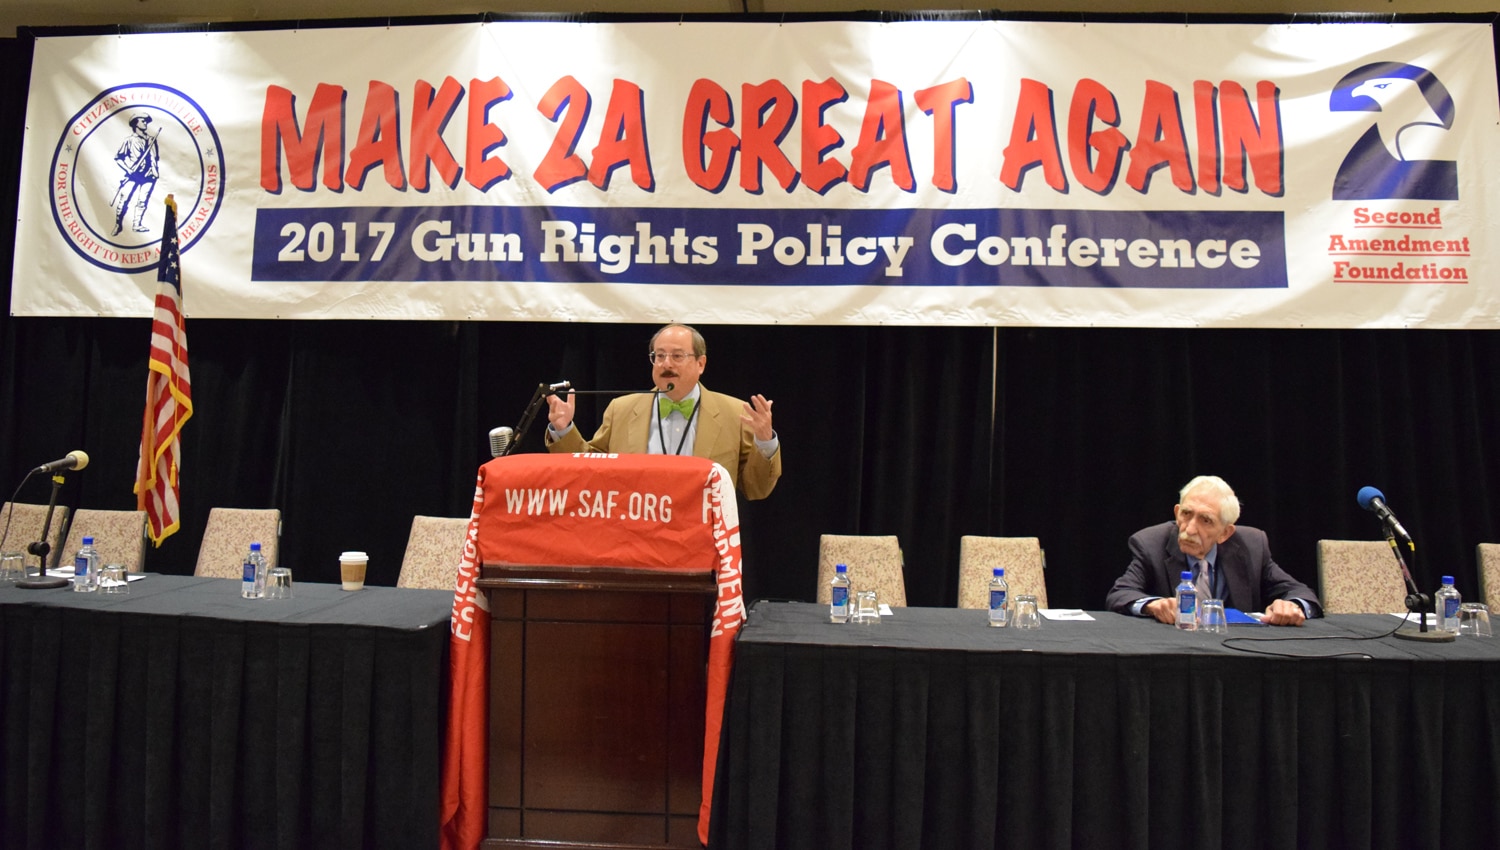 Alan Gottlieb, president of the Second Amendment Foundation, gives the opening speech at the Gun Rights Policy Conference in Dallas on Sept. 30, 2017. (Photo: Daniel Terrill/Guns.com)